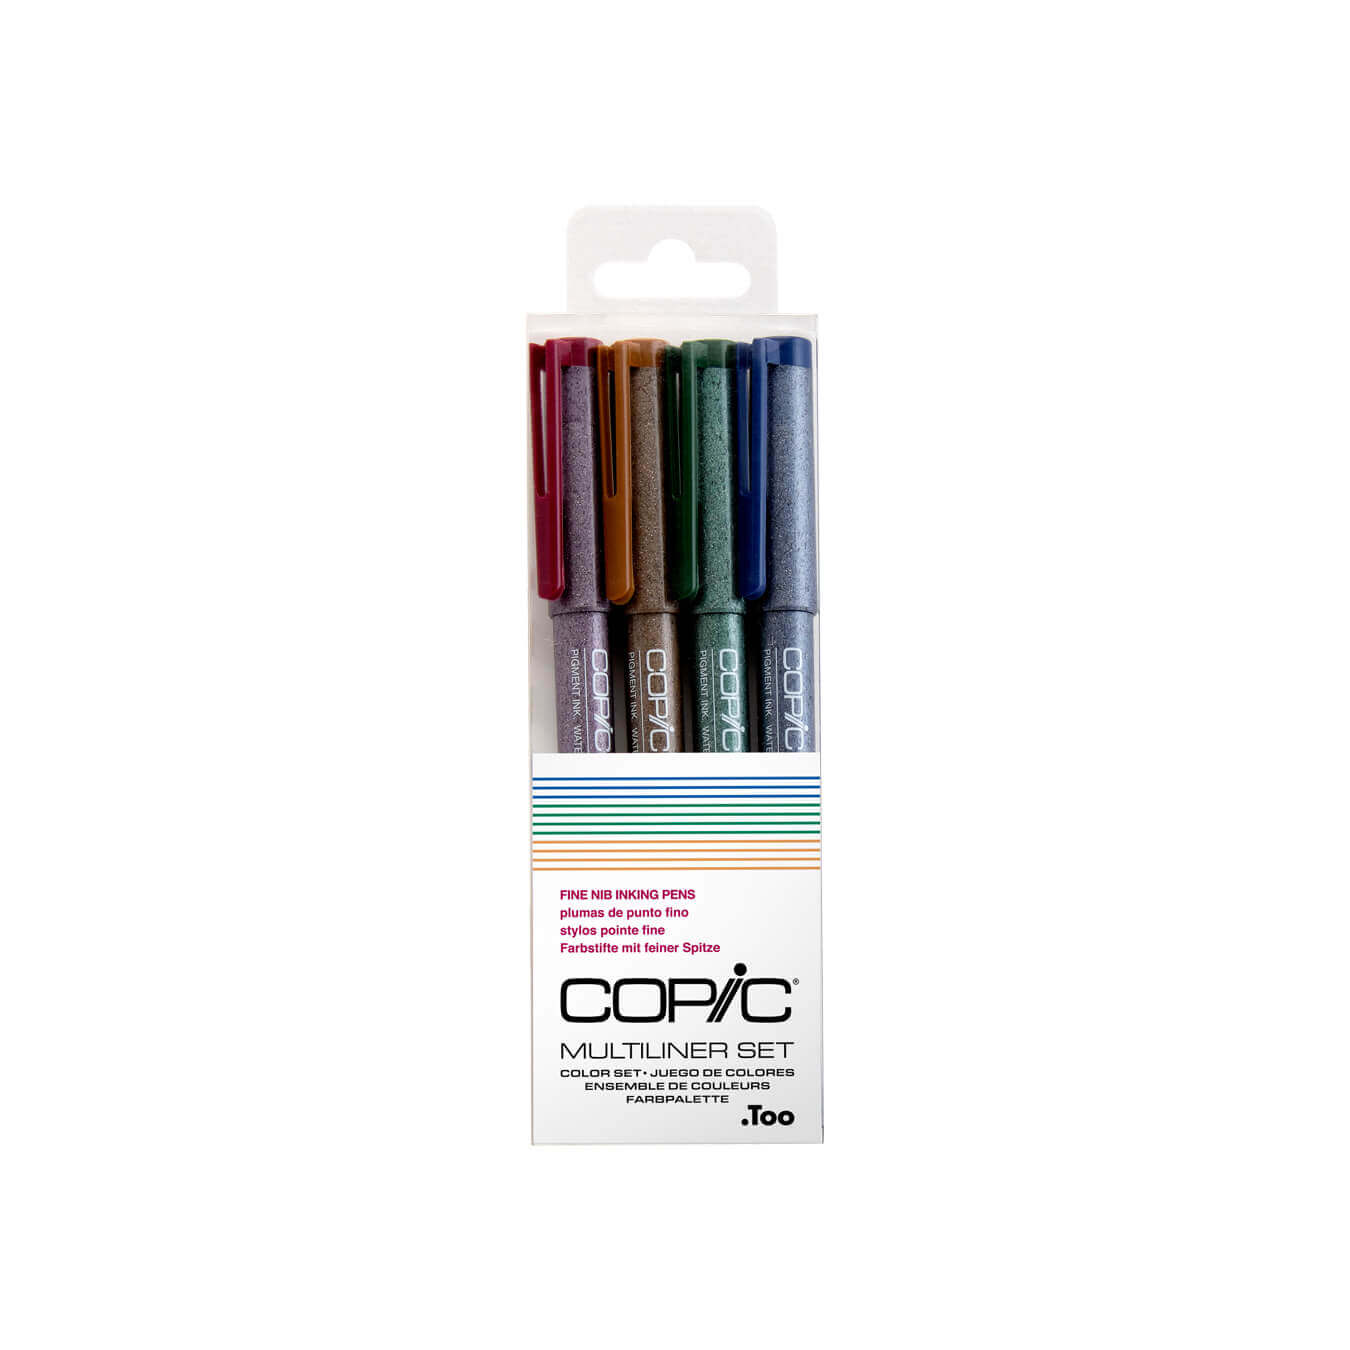 Copic Marker Multiliner Sepia Tip Ink Pen 0.3 mm by Copic Marker 